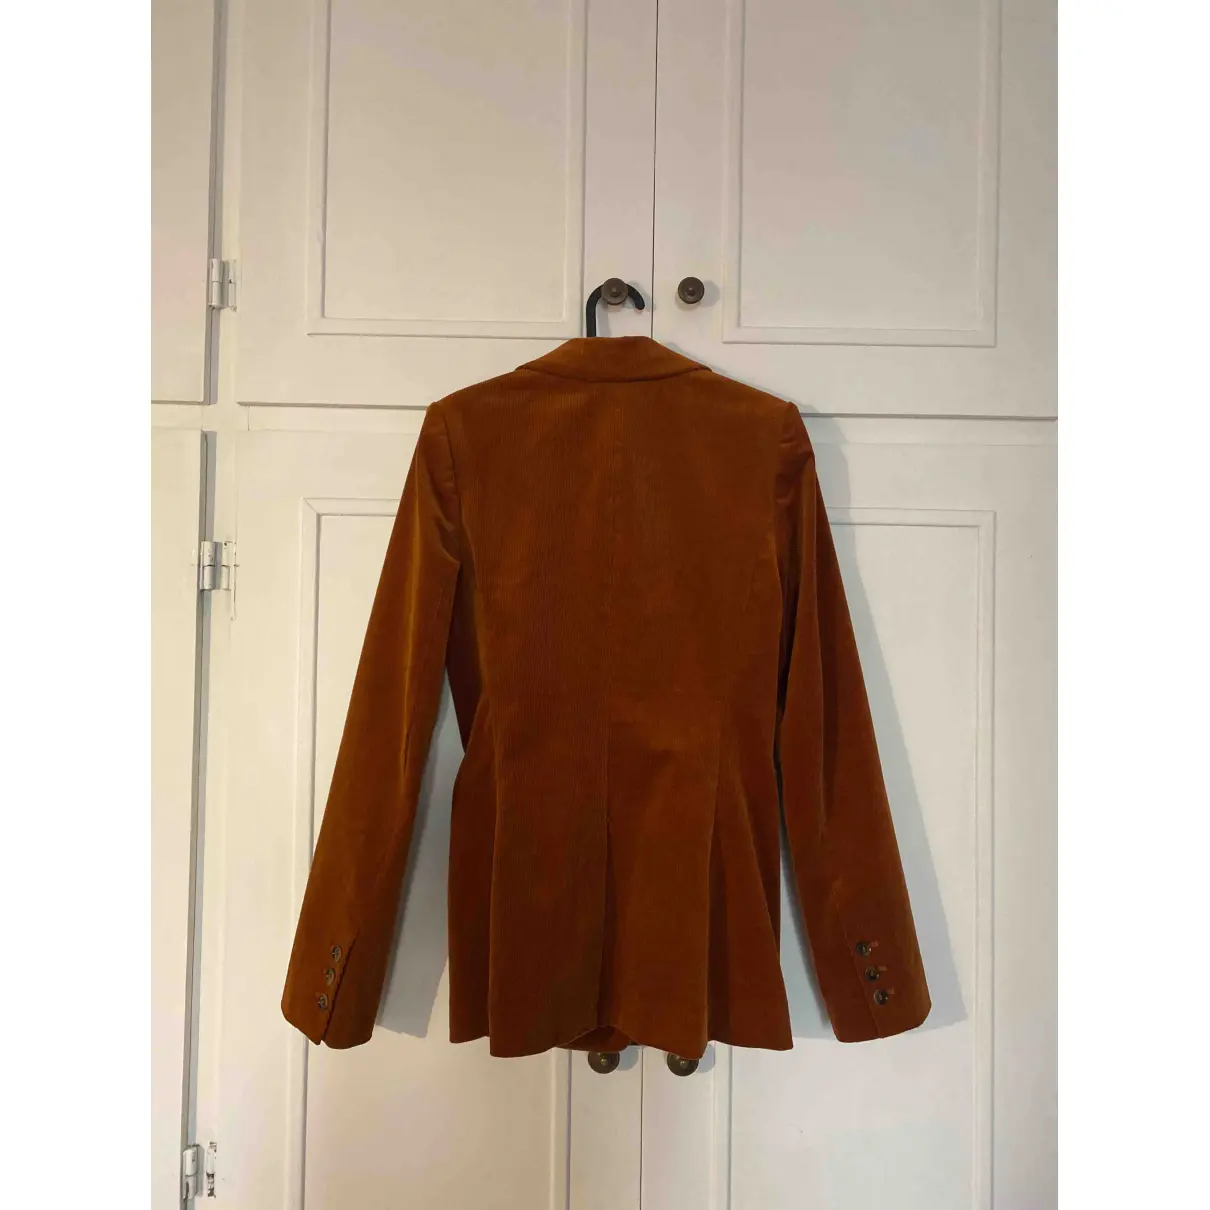 Buy & Other Stories Brown Polyester Jacket online